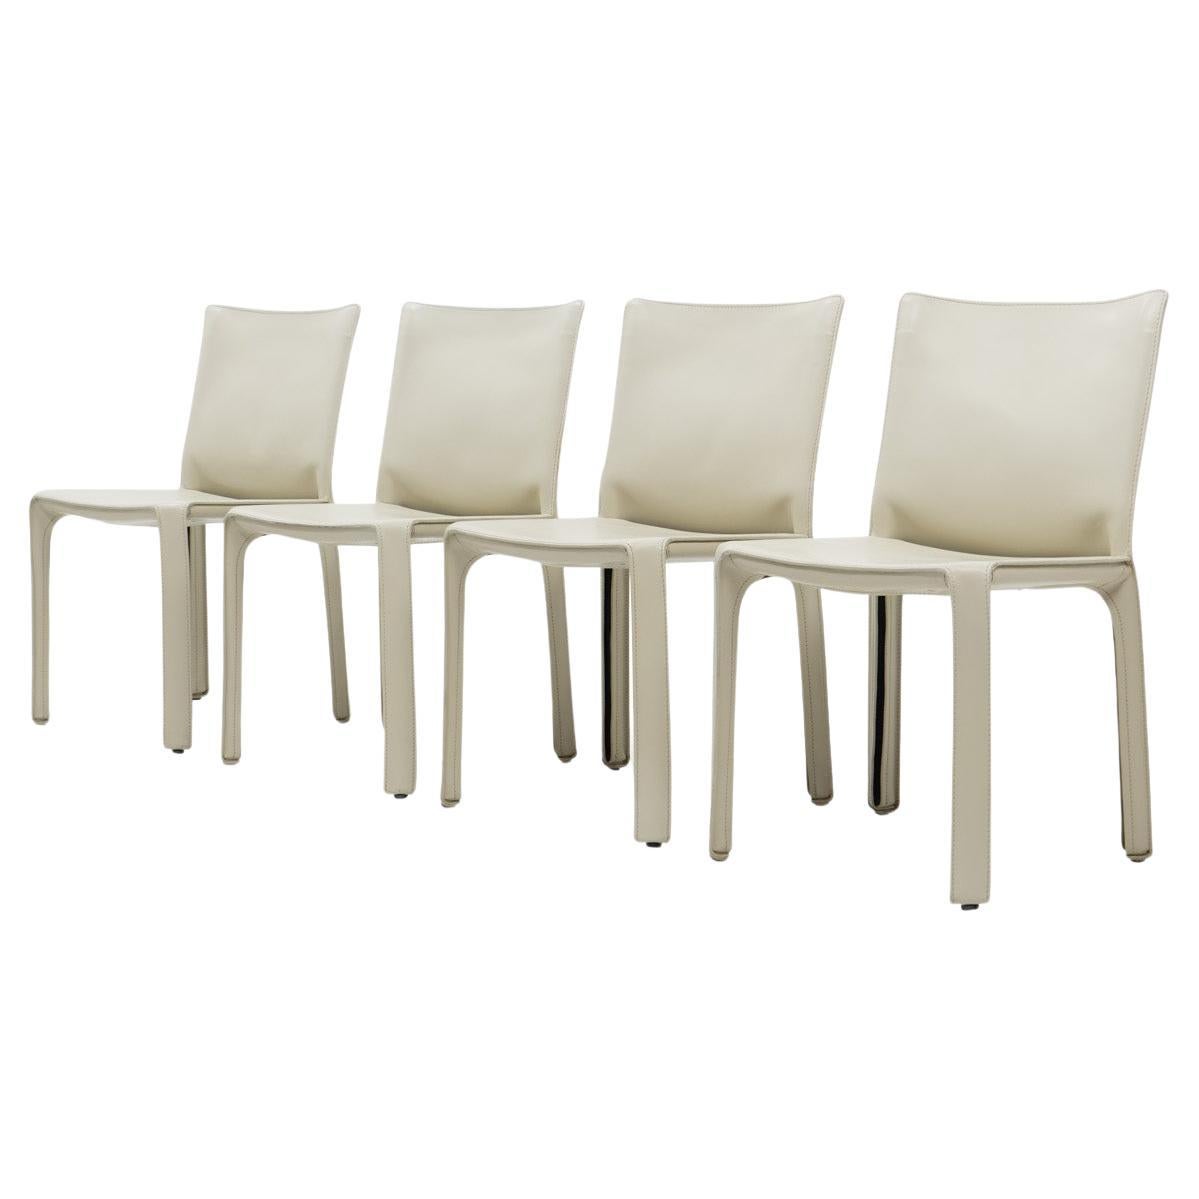 Cab 412 Chairs in Cream Leather by Mario Bellini for Cassina, Set of 4 For Sale